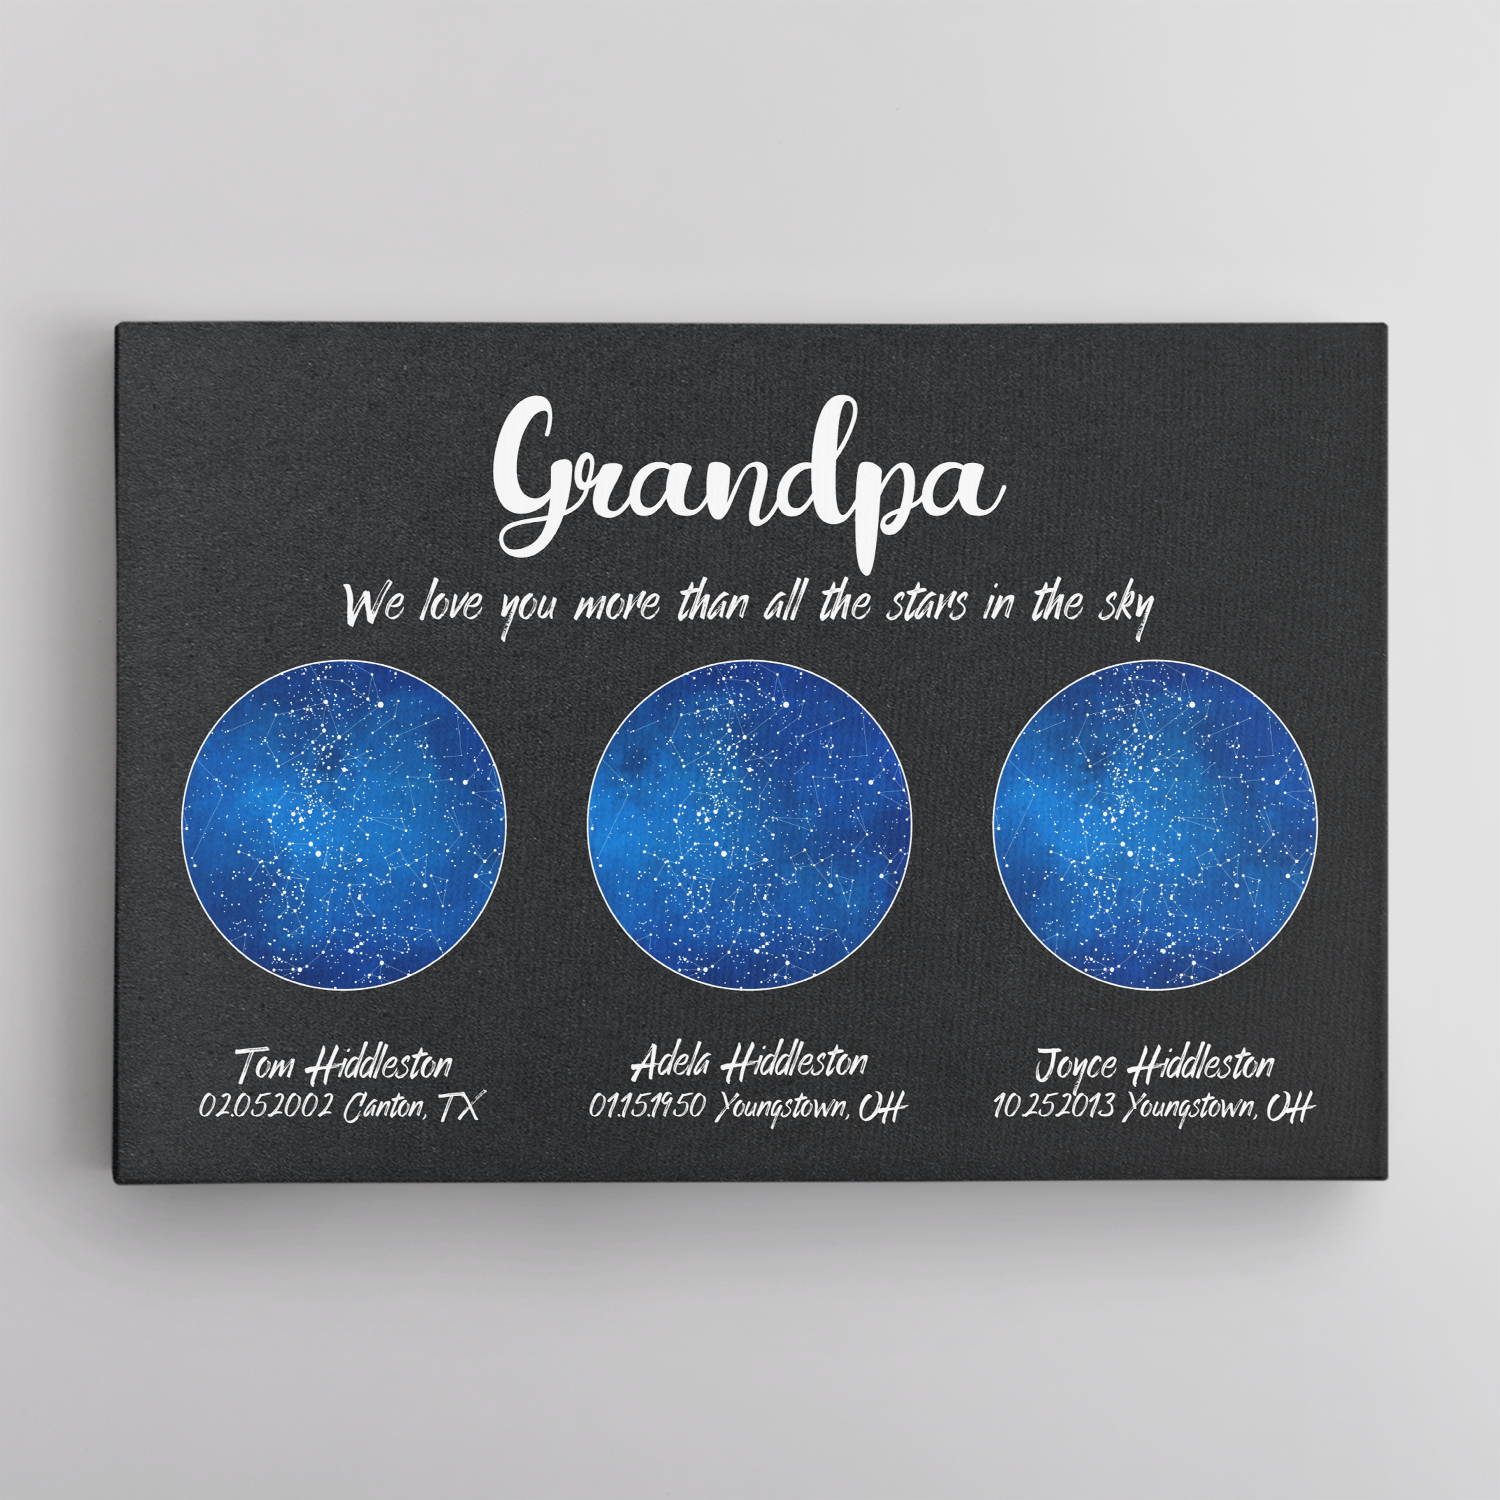 If your grandpa is an astronomy lover or stars lover, a custom star map will be a creative gift for you to choose from. The star constellation in the night sky over the chosen location on the date you request will be described exactly by this star themed photo. Let this creative space gift surprise your grandpa on this Fathers Day right away.